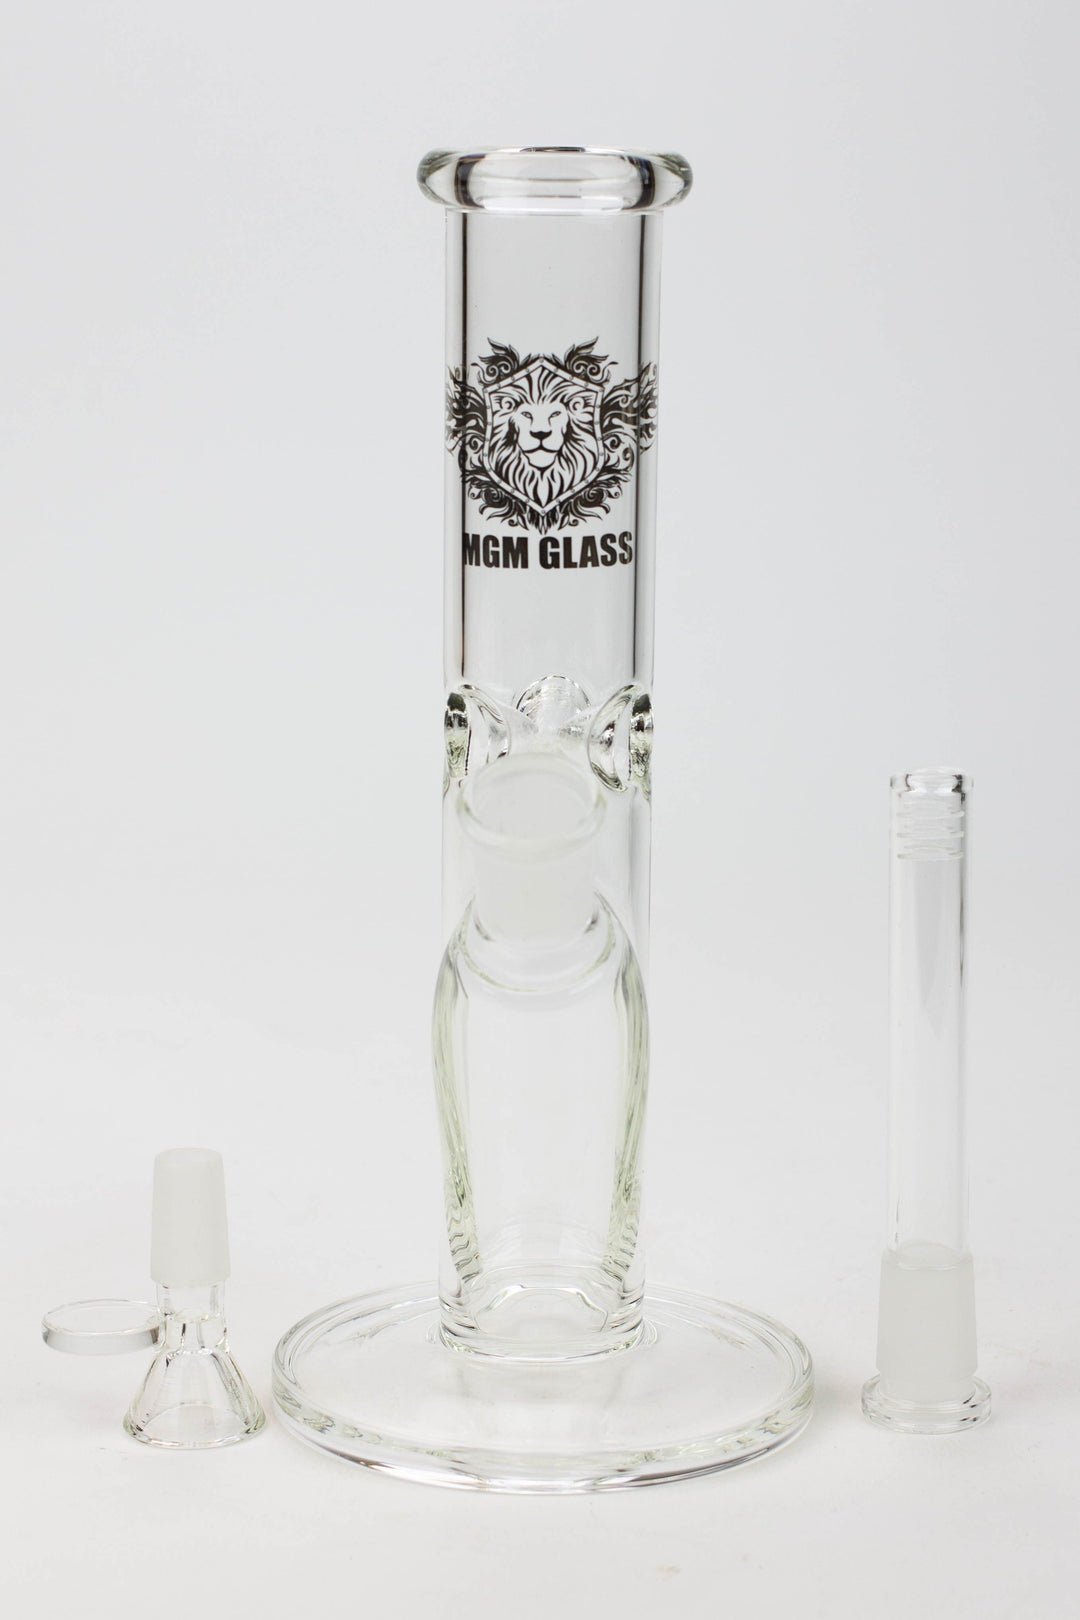 Mgm glass straight tube glass water pipes_13